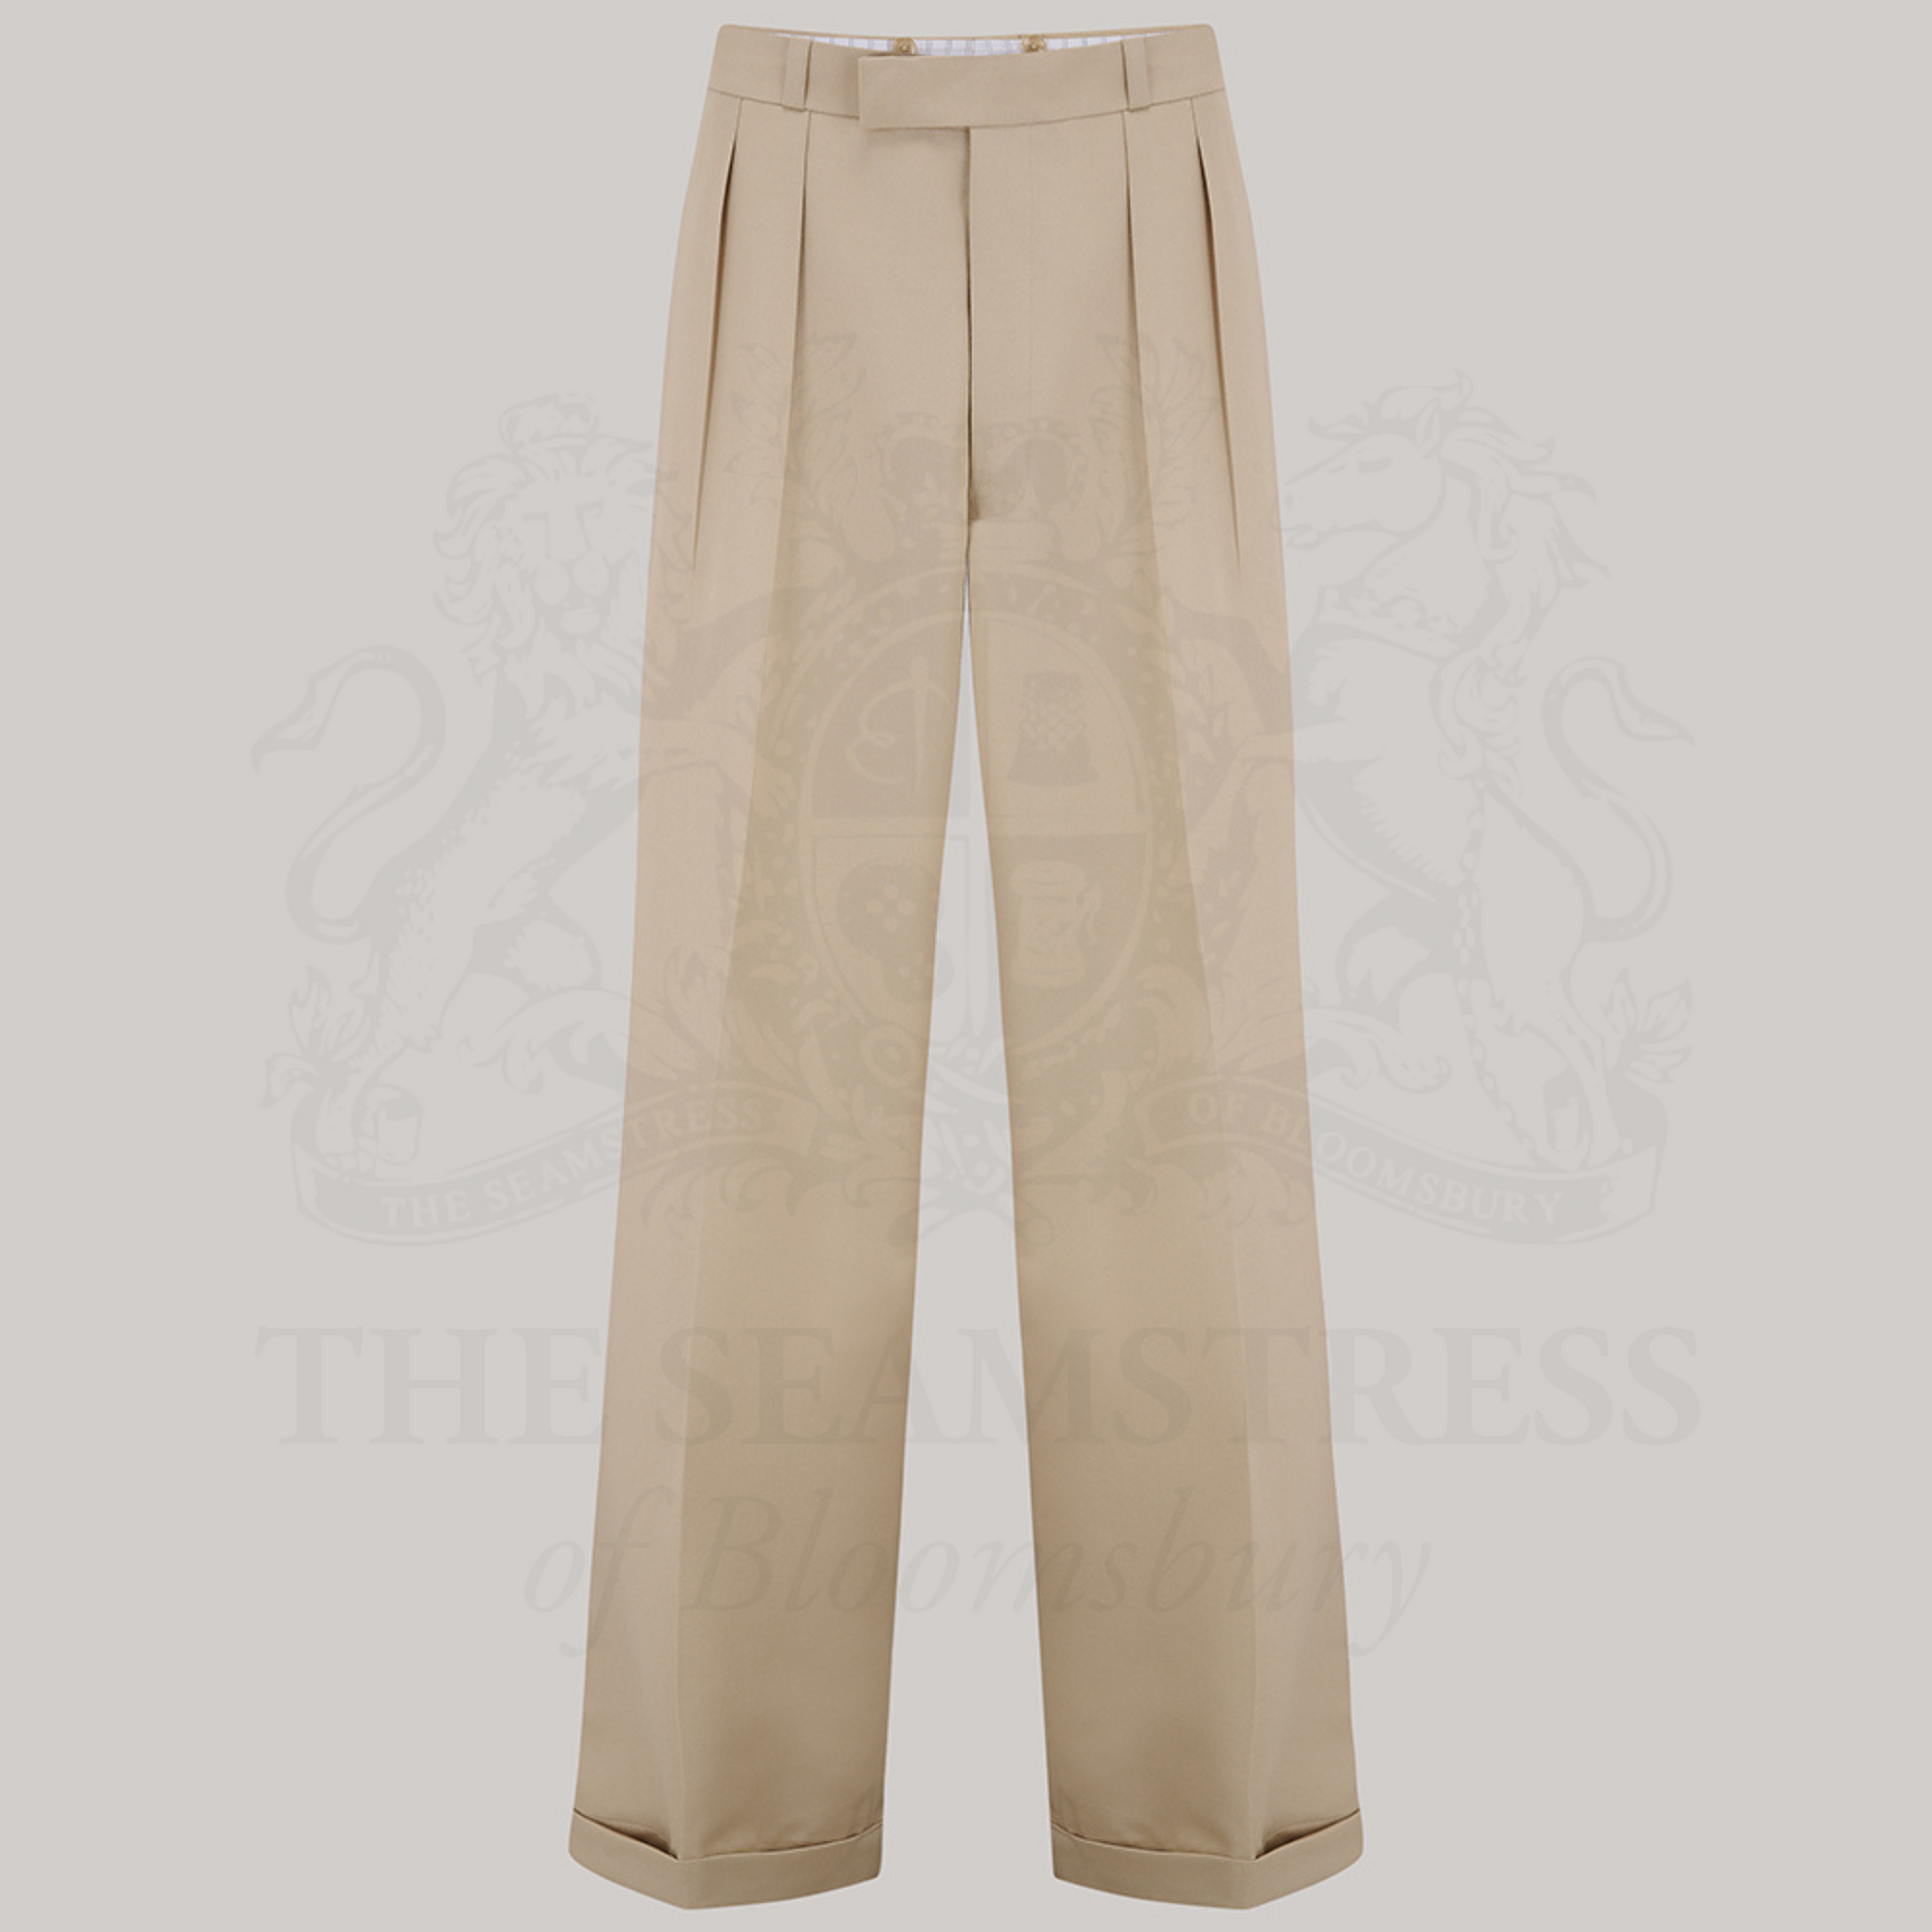 Fake Alpha Vintage 1940s Tailored loose-fit Trousers - Farfetch